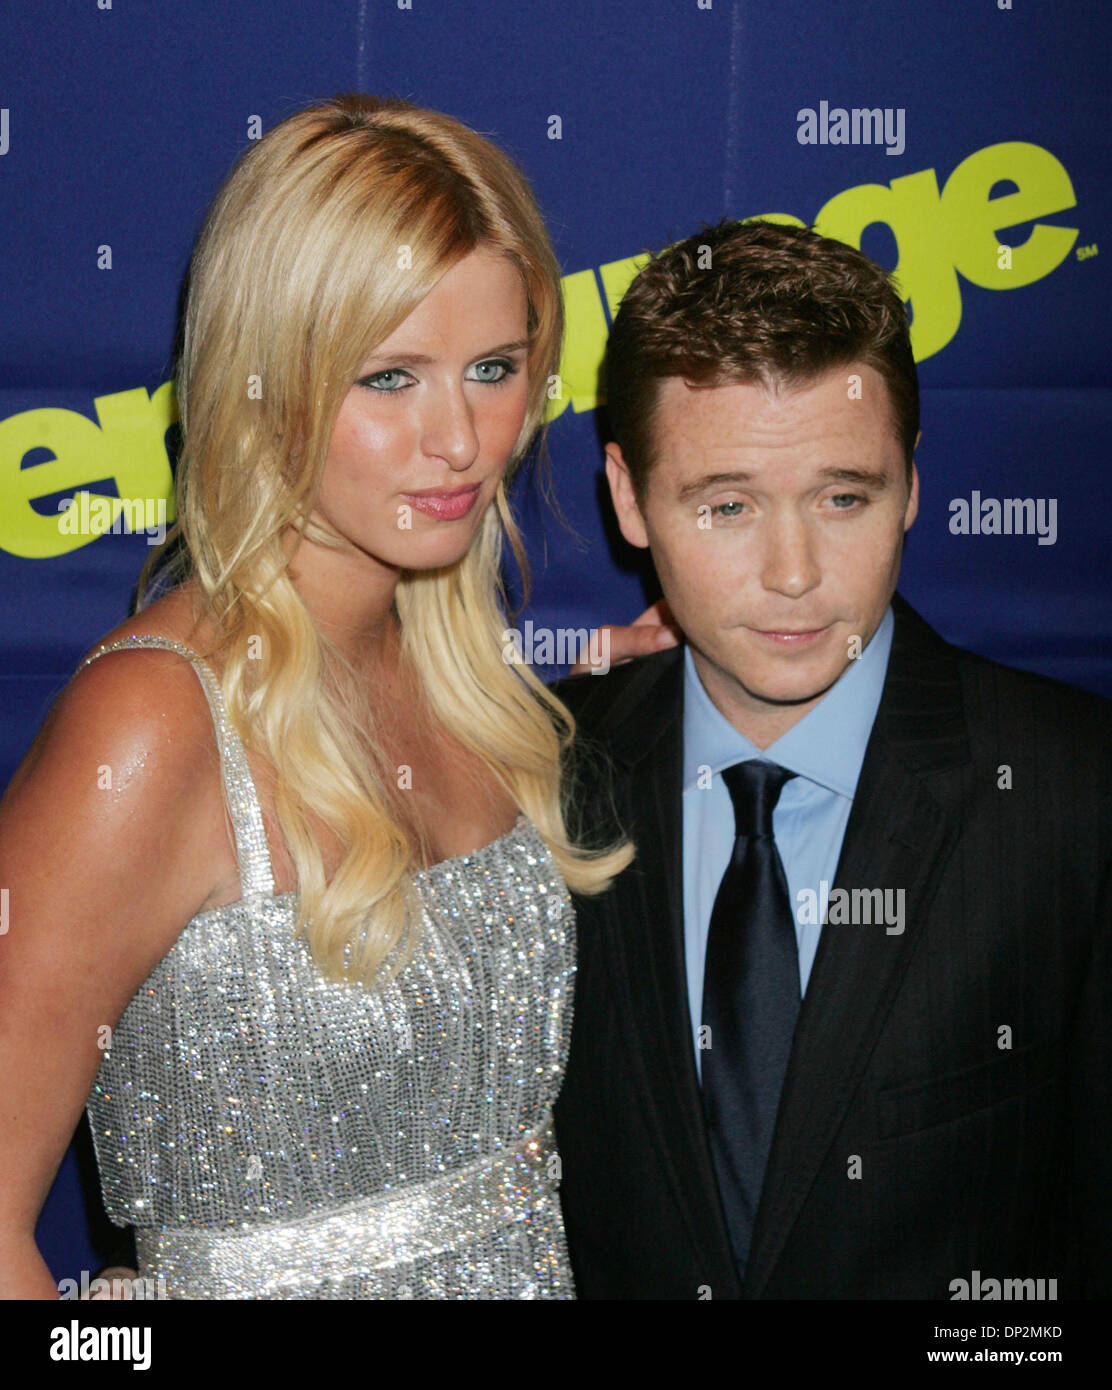 Jun 07, 2006; New York, NY, USA; Socialite NICKY HILTON  and actor KEVIN CONNOLLY at the arrivals for the 3rd season New York  premiere of HBO's 'Entourage' held at the Skirball Center for the Performing Arts at New York University. Mandatory Credit: Photo by Nancy Kaszerman/ZUMA Press. (©) Copyright 2006 by Nancy Kaszerman Stock Photo